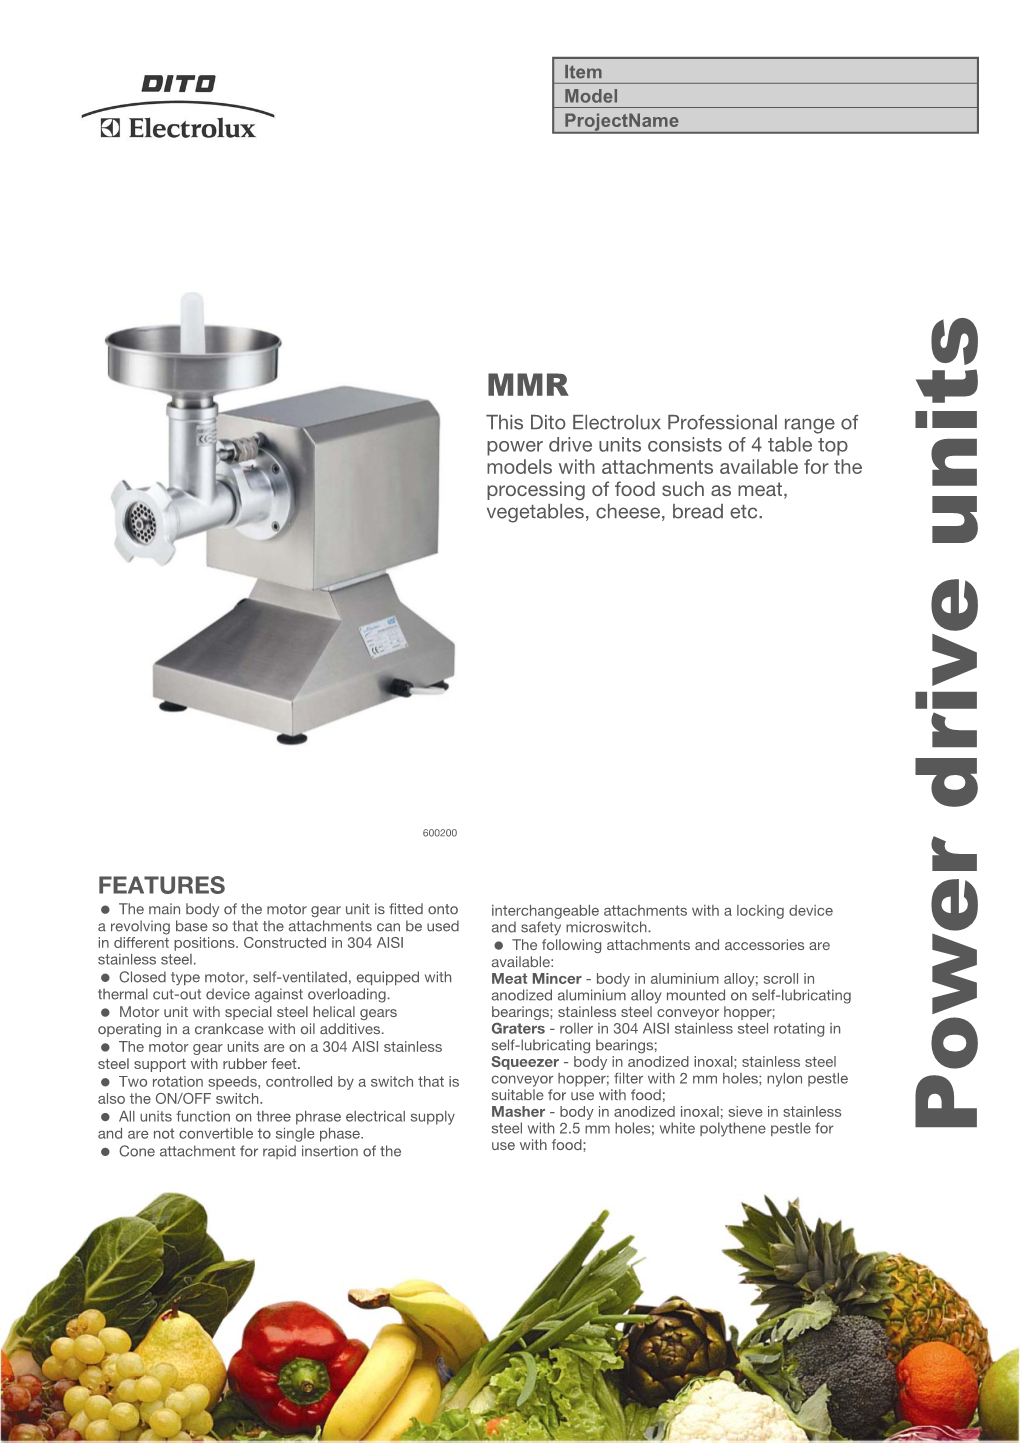 Power Drive Units Consists of 4 Table Top Models with Attachments Available for the Processing of Food Such As Meat, Vegetables, Cheese, Bread Etc